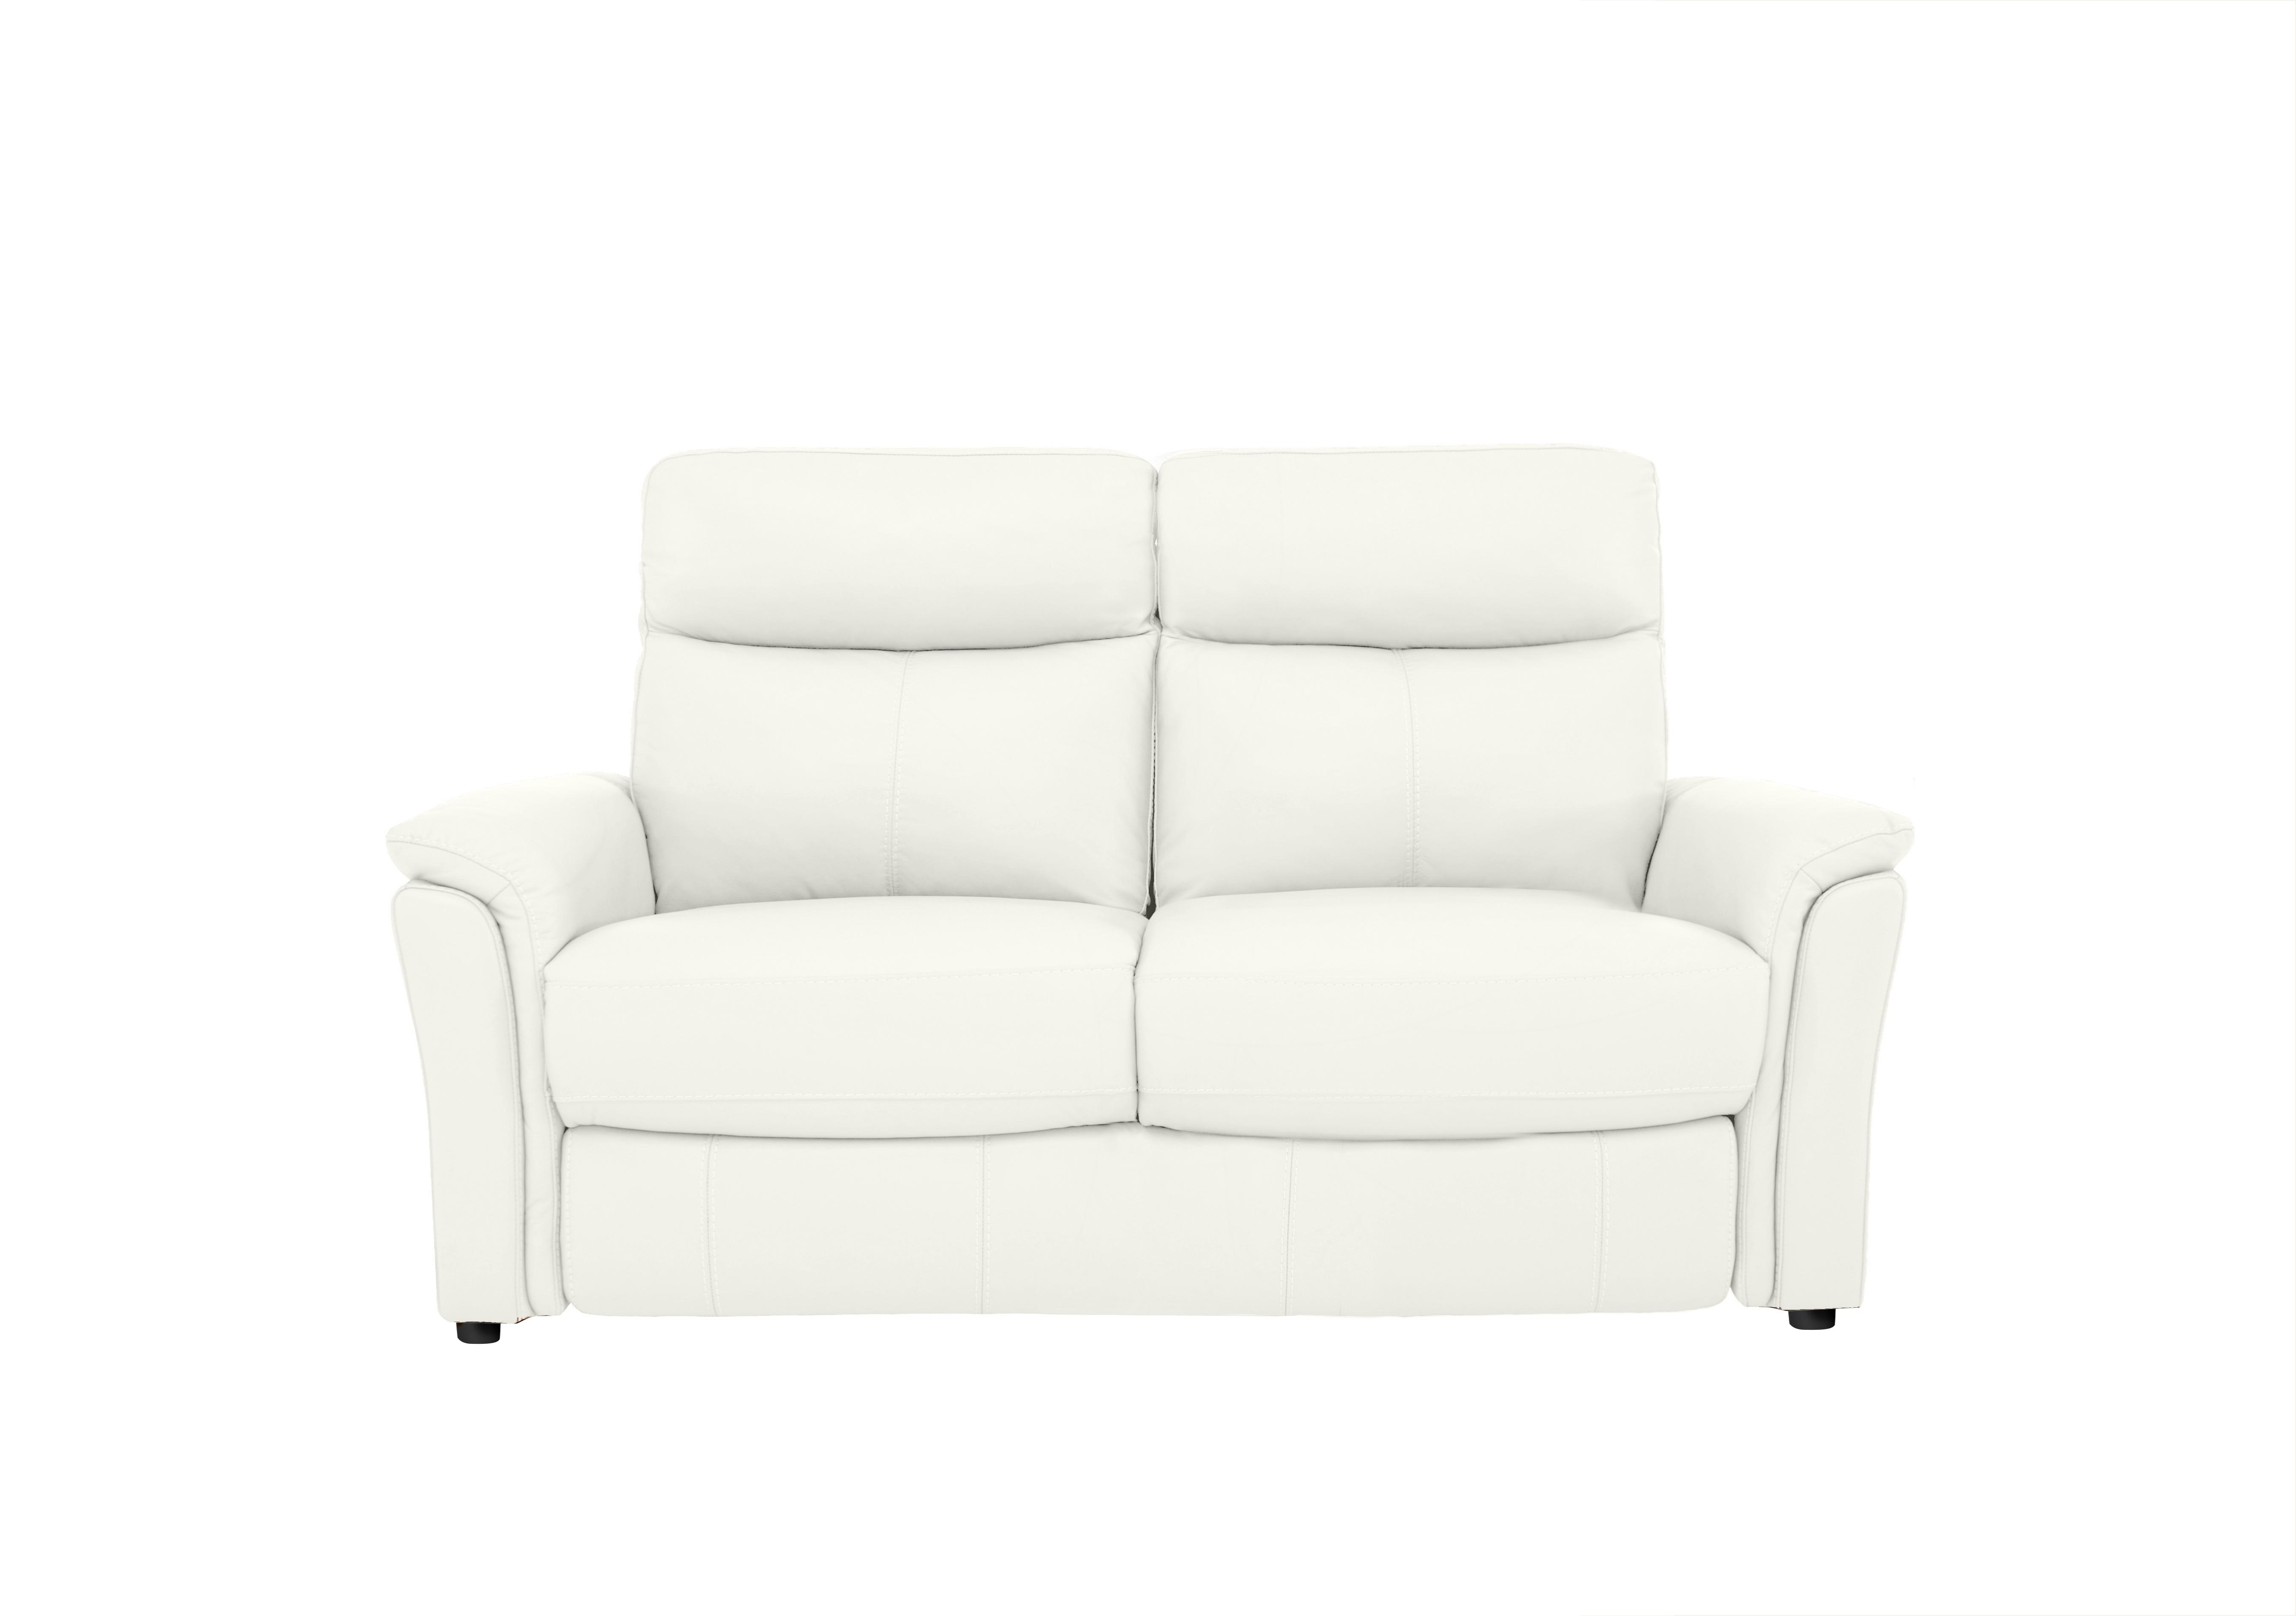 Compact Collection Piccolo 2 Seater Leather Static Sofa in Bv-744d Star White on Furniture Village